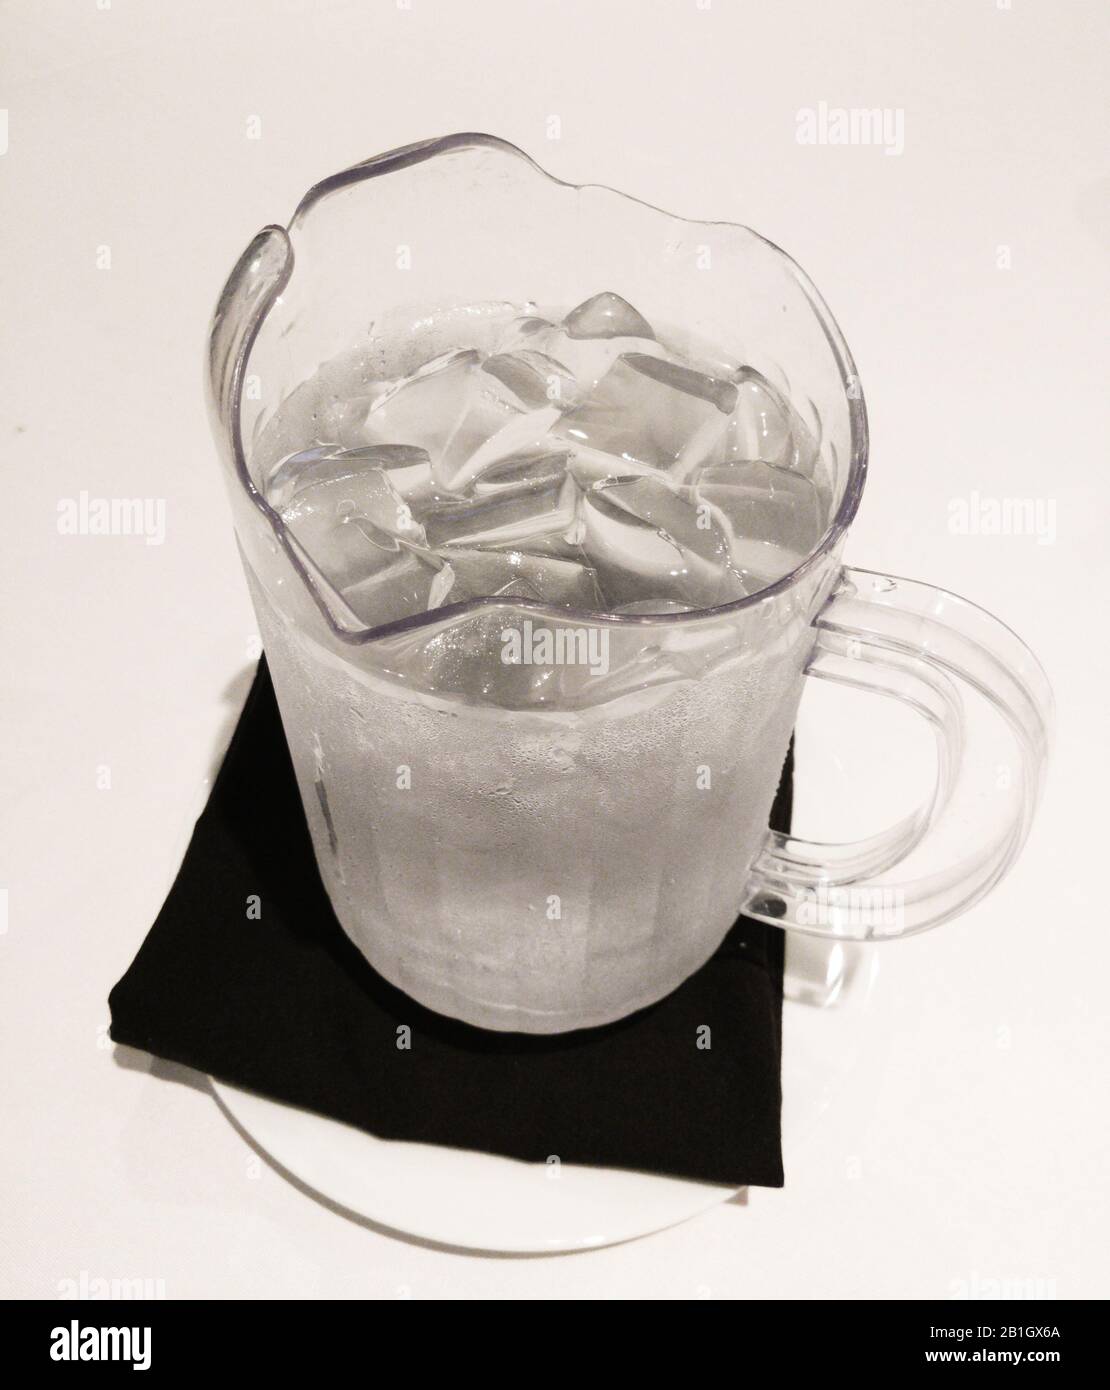 Pitcher of Iced Water